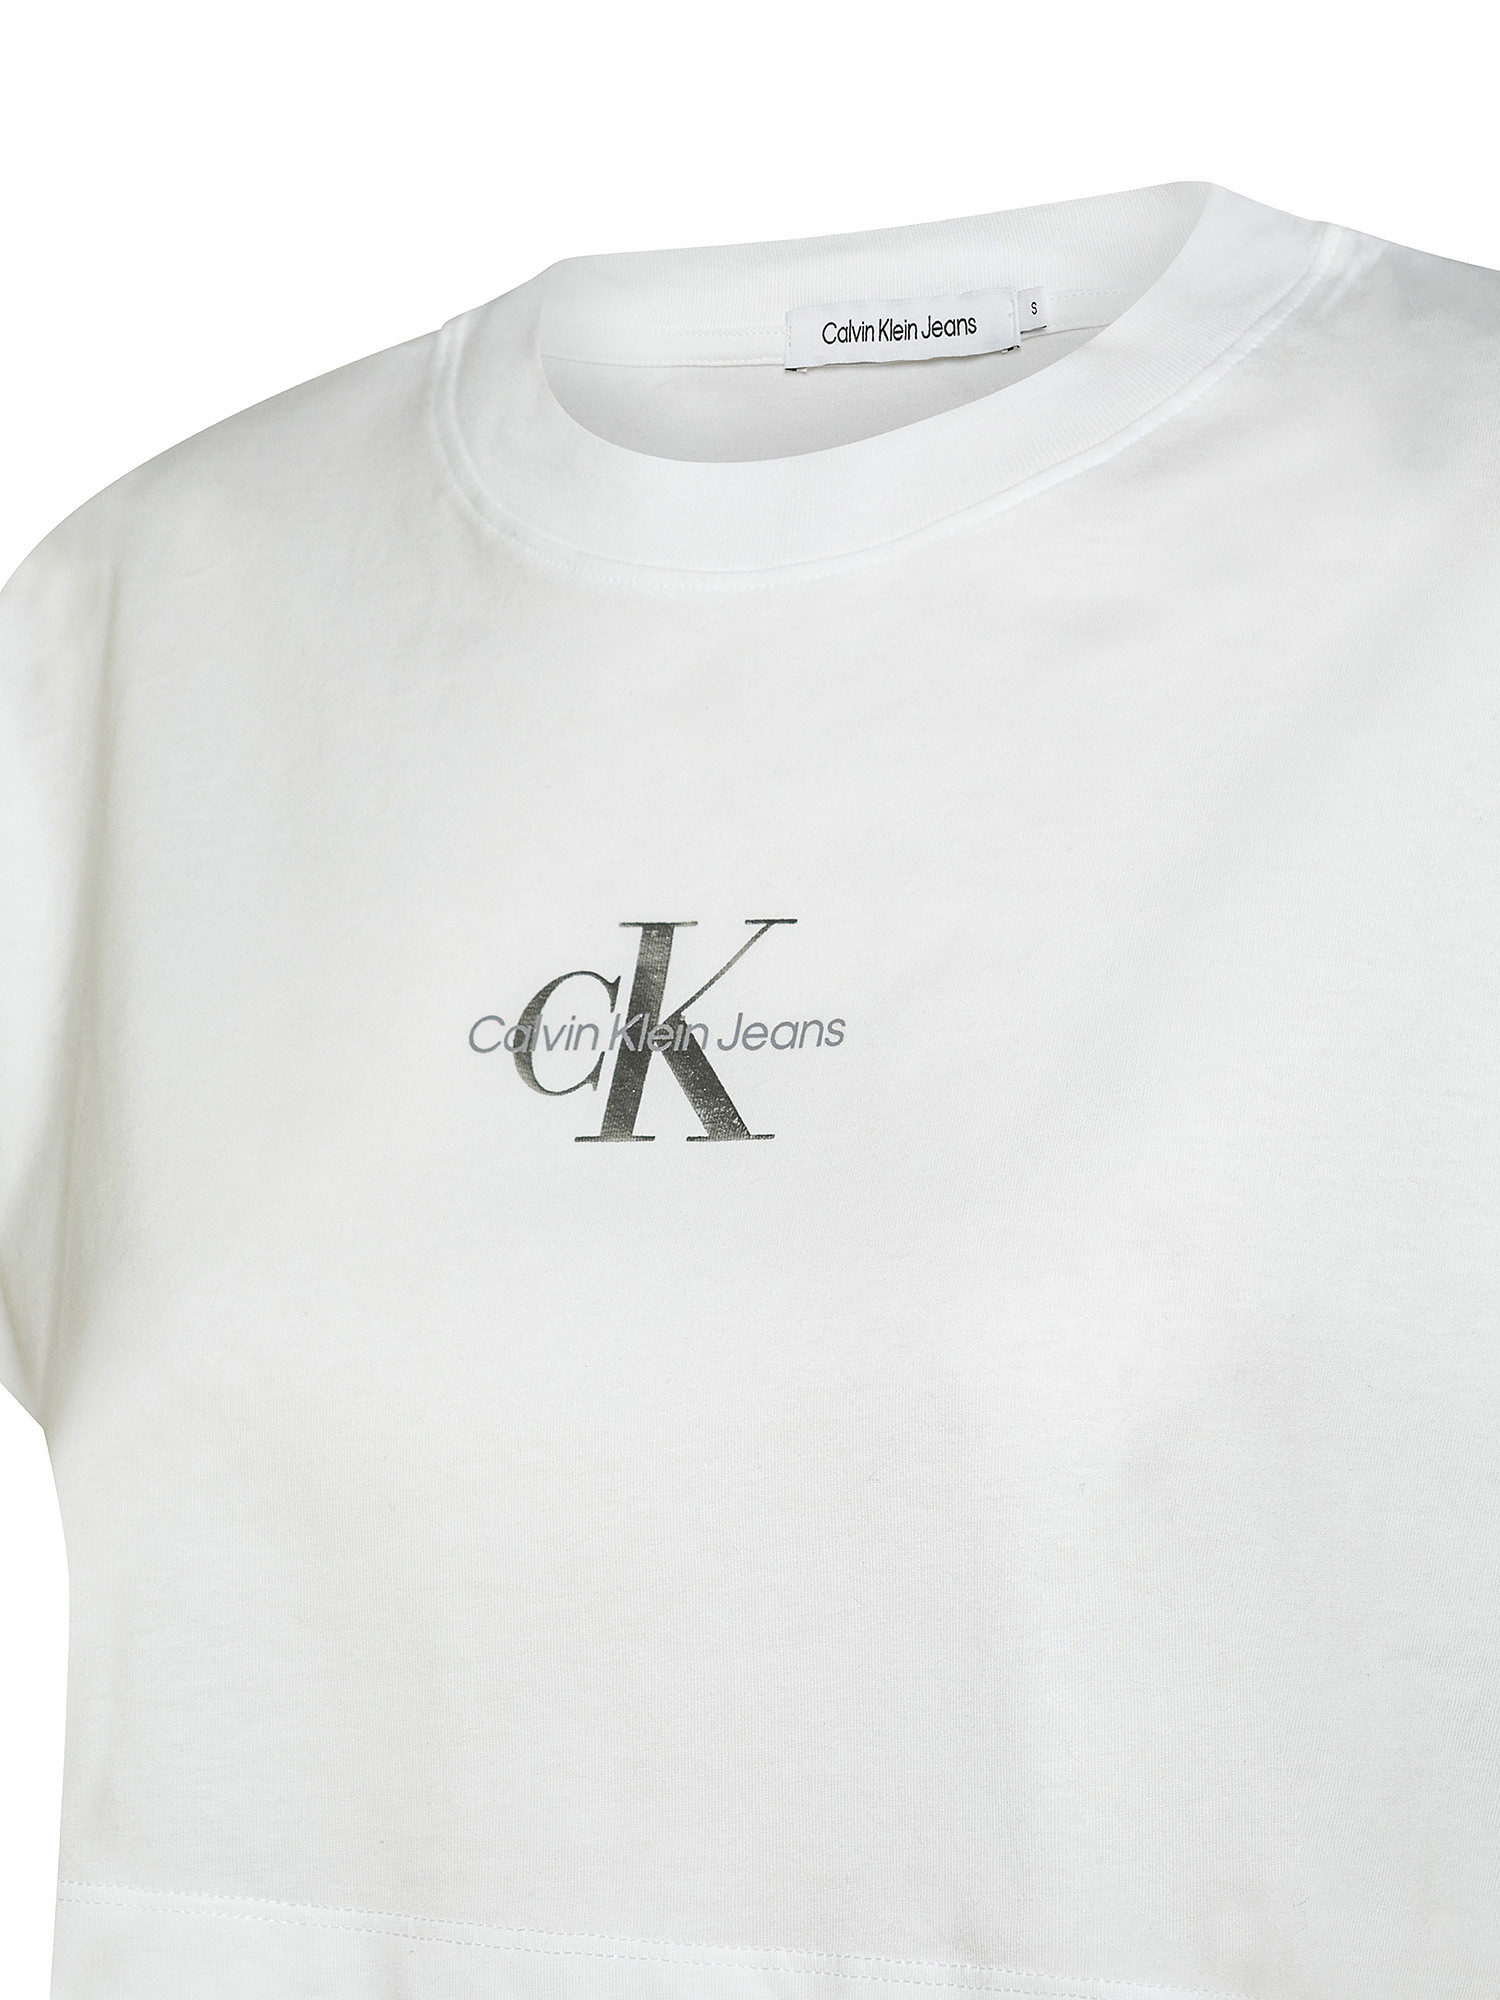 Crop-top with logo, White, large image number 2